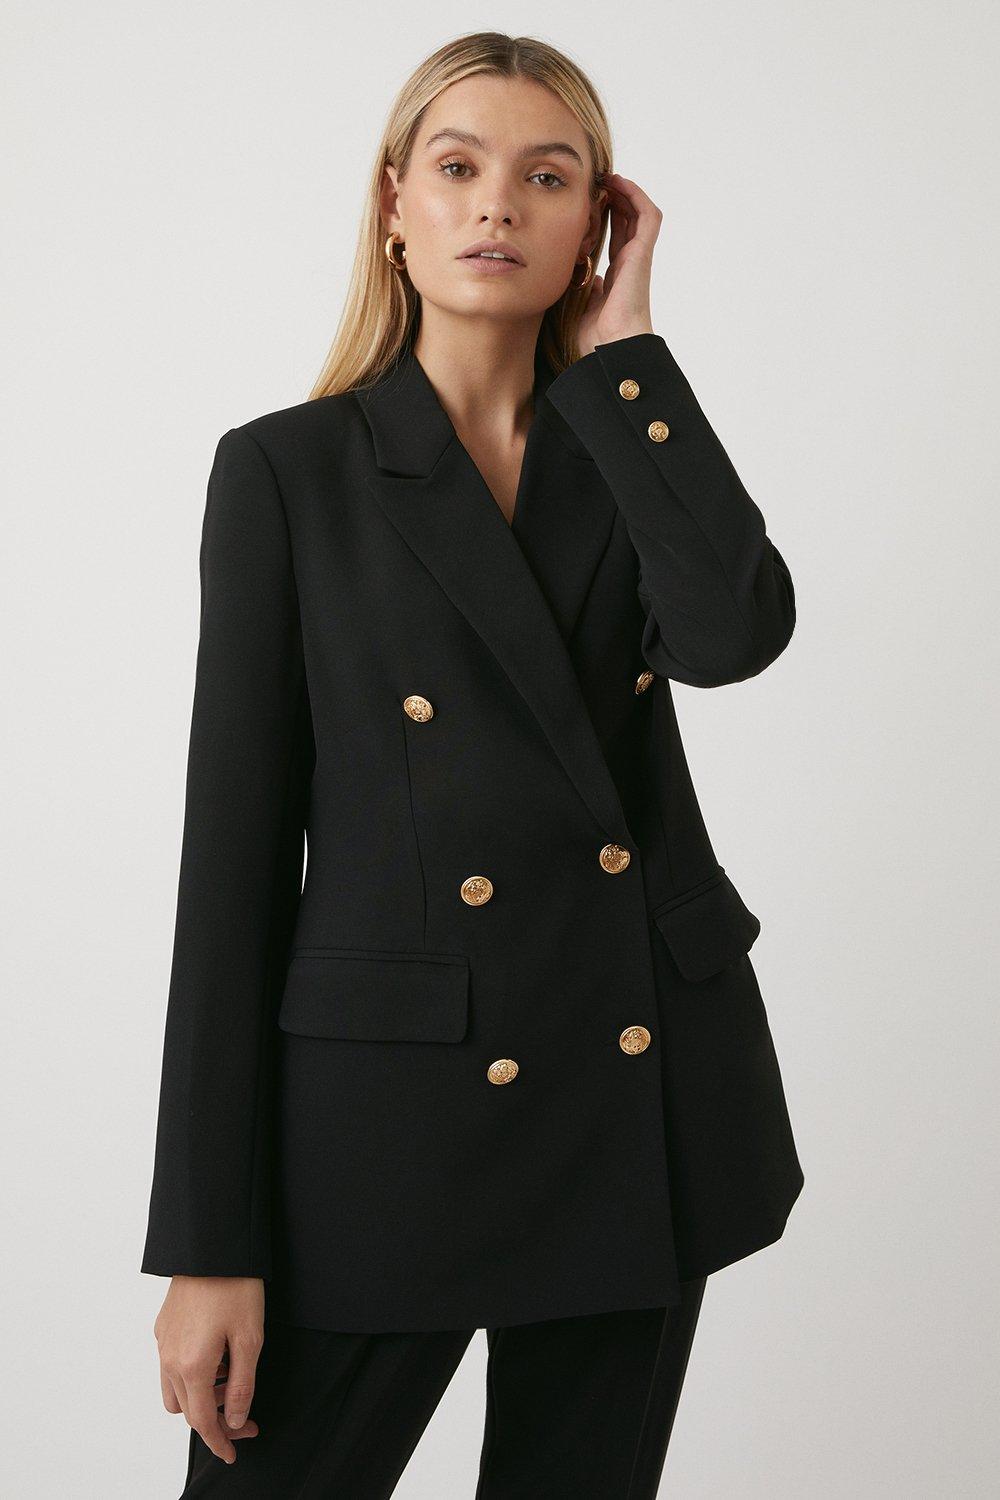 Womens Double Breasted Military Blazer